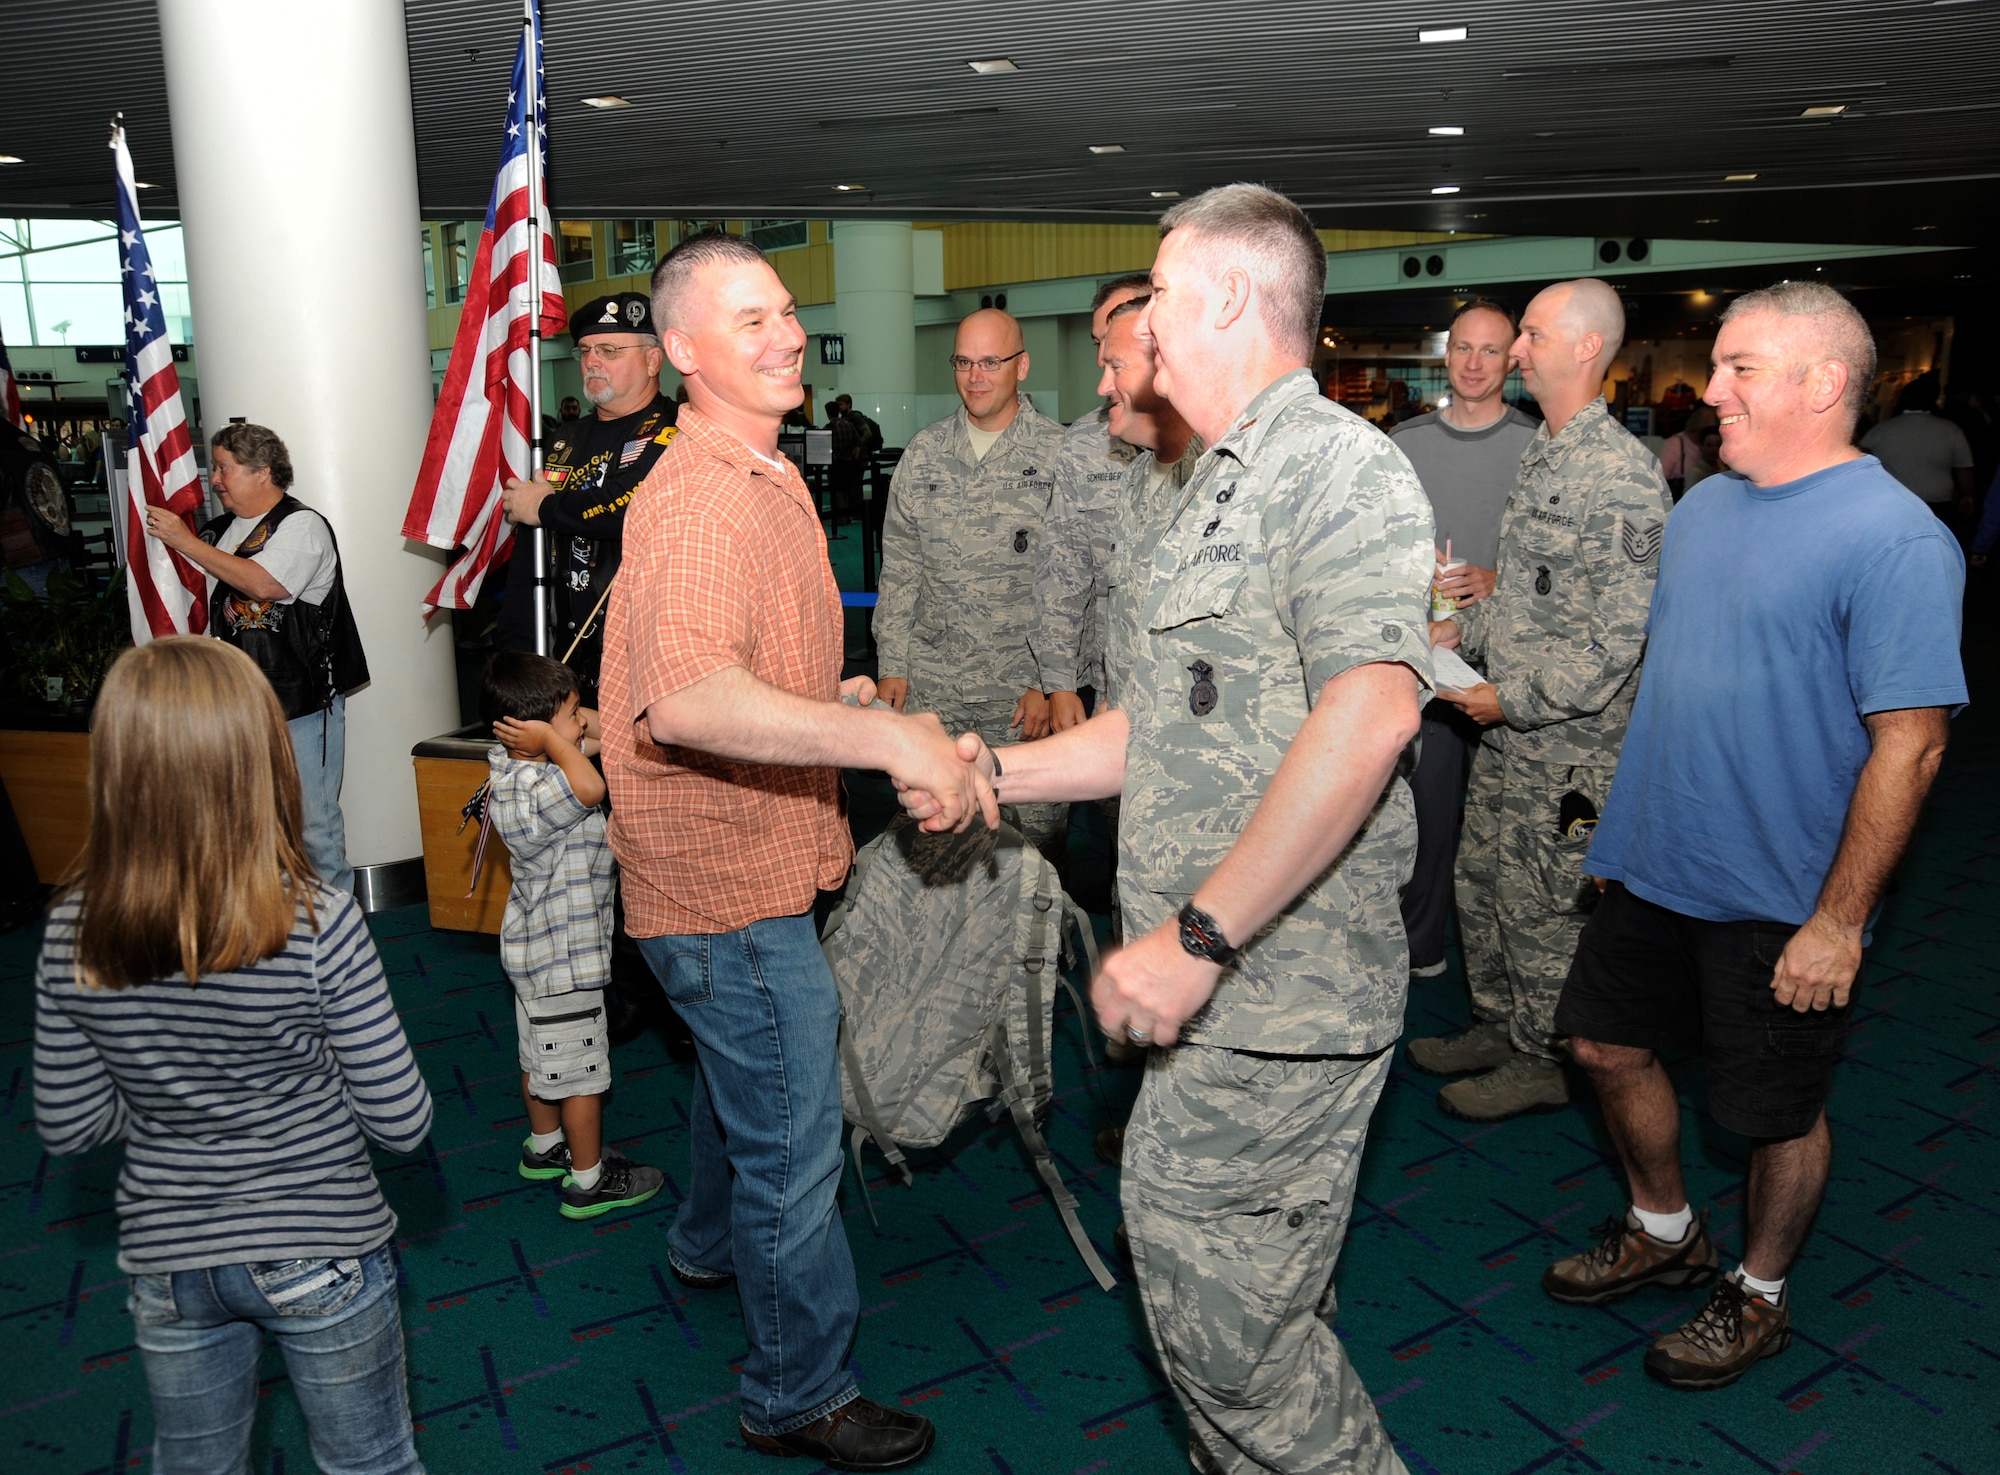 Members of the 142nd Fighter Wing Security Forces Squadron are welcomed back to Oregon at the Portland International Airport after their recent deployment, Aug. 8, 2013. A total of 26 Airmen from the 142nd Fighter Wing spent six months in Qatar in support of Operation Enduring Freedom. (Air National Guard photo by Tech. Sgt. John Hughel, 142nd Fighter Wing Public Affairs/released)